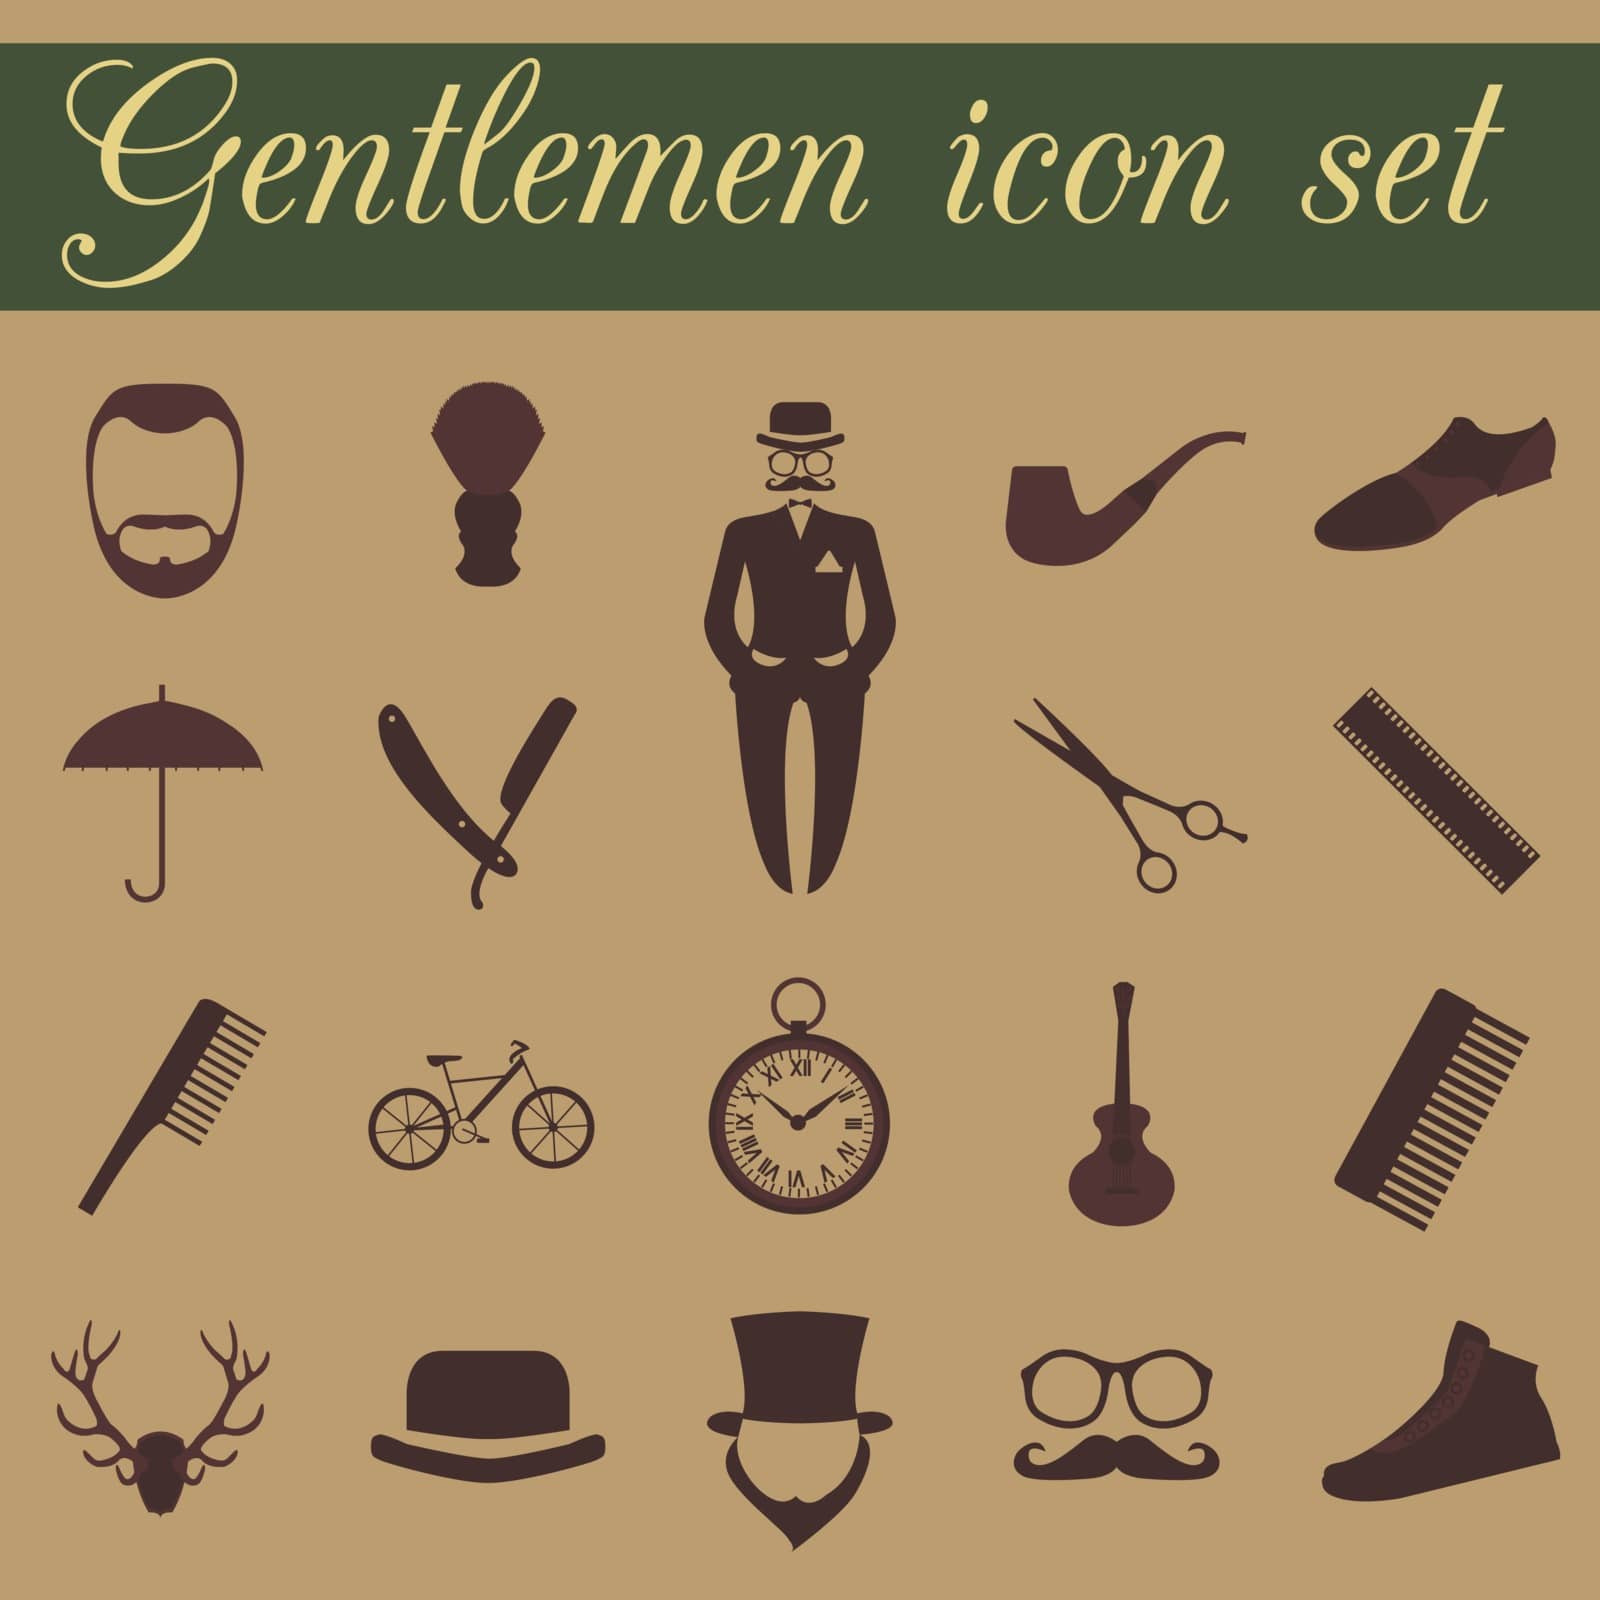 Set of vintage barber, hairstyle and gentlemen icon. Vector illustration